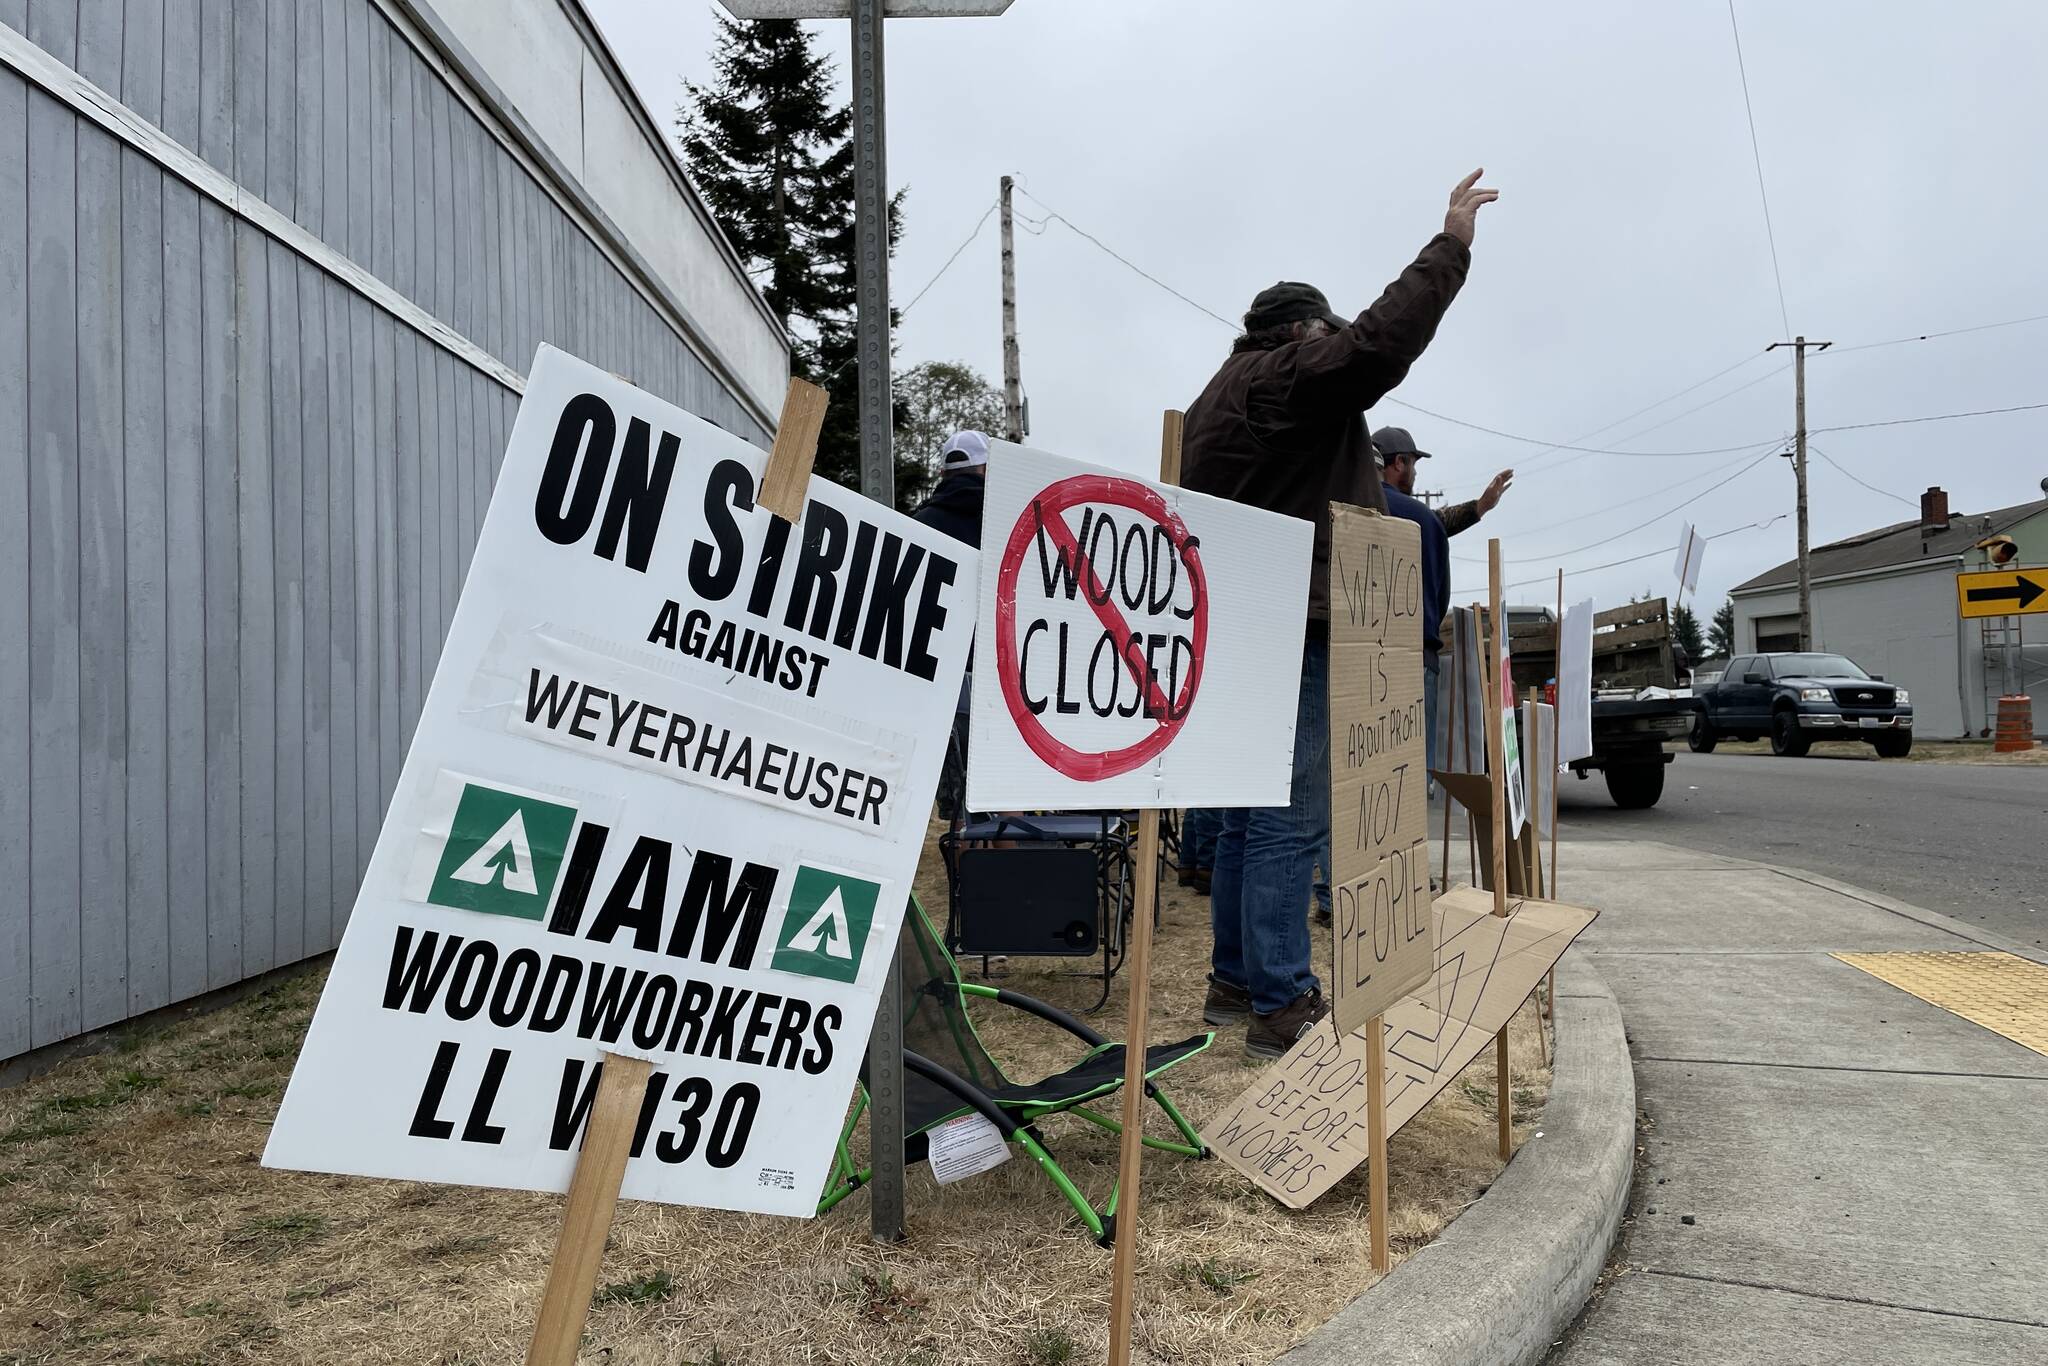 Union members have been striking against Weyerhaeuser at facilities across the state since Sept. 13.